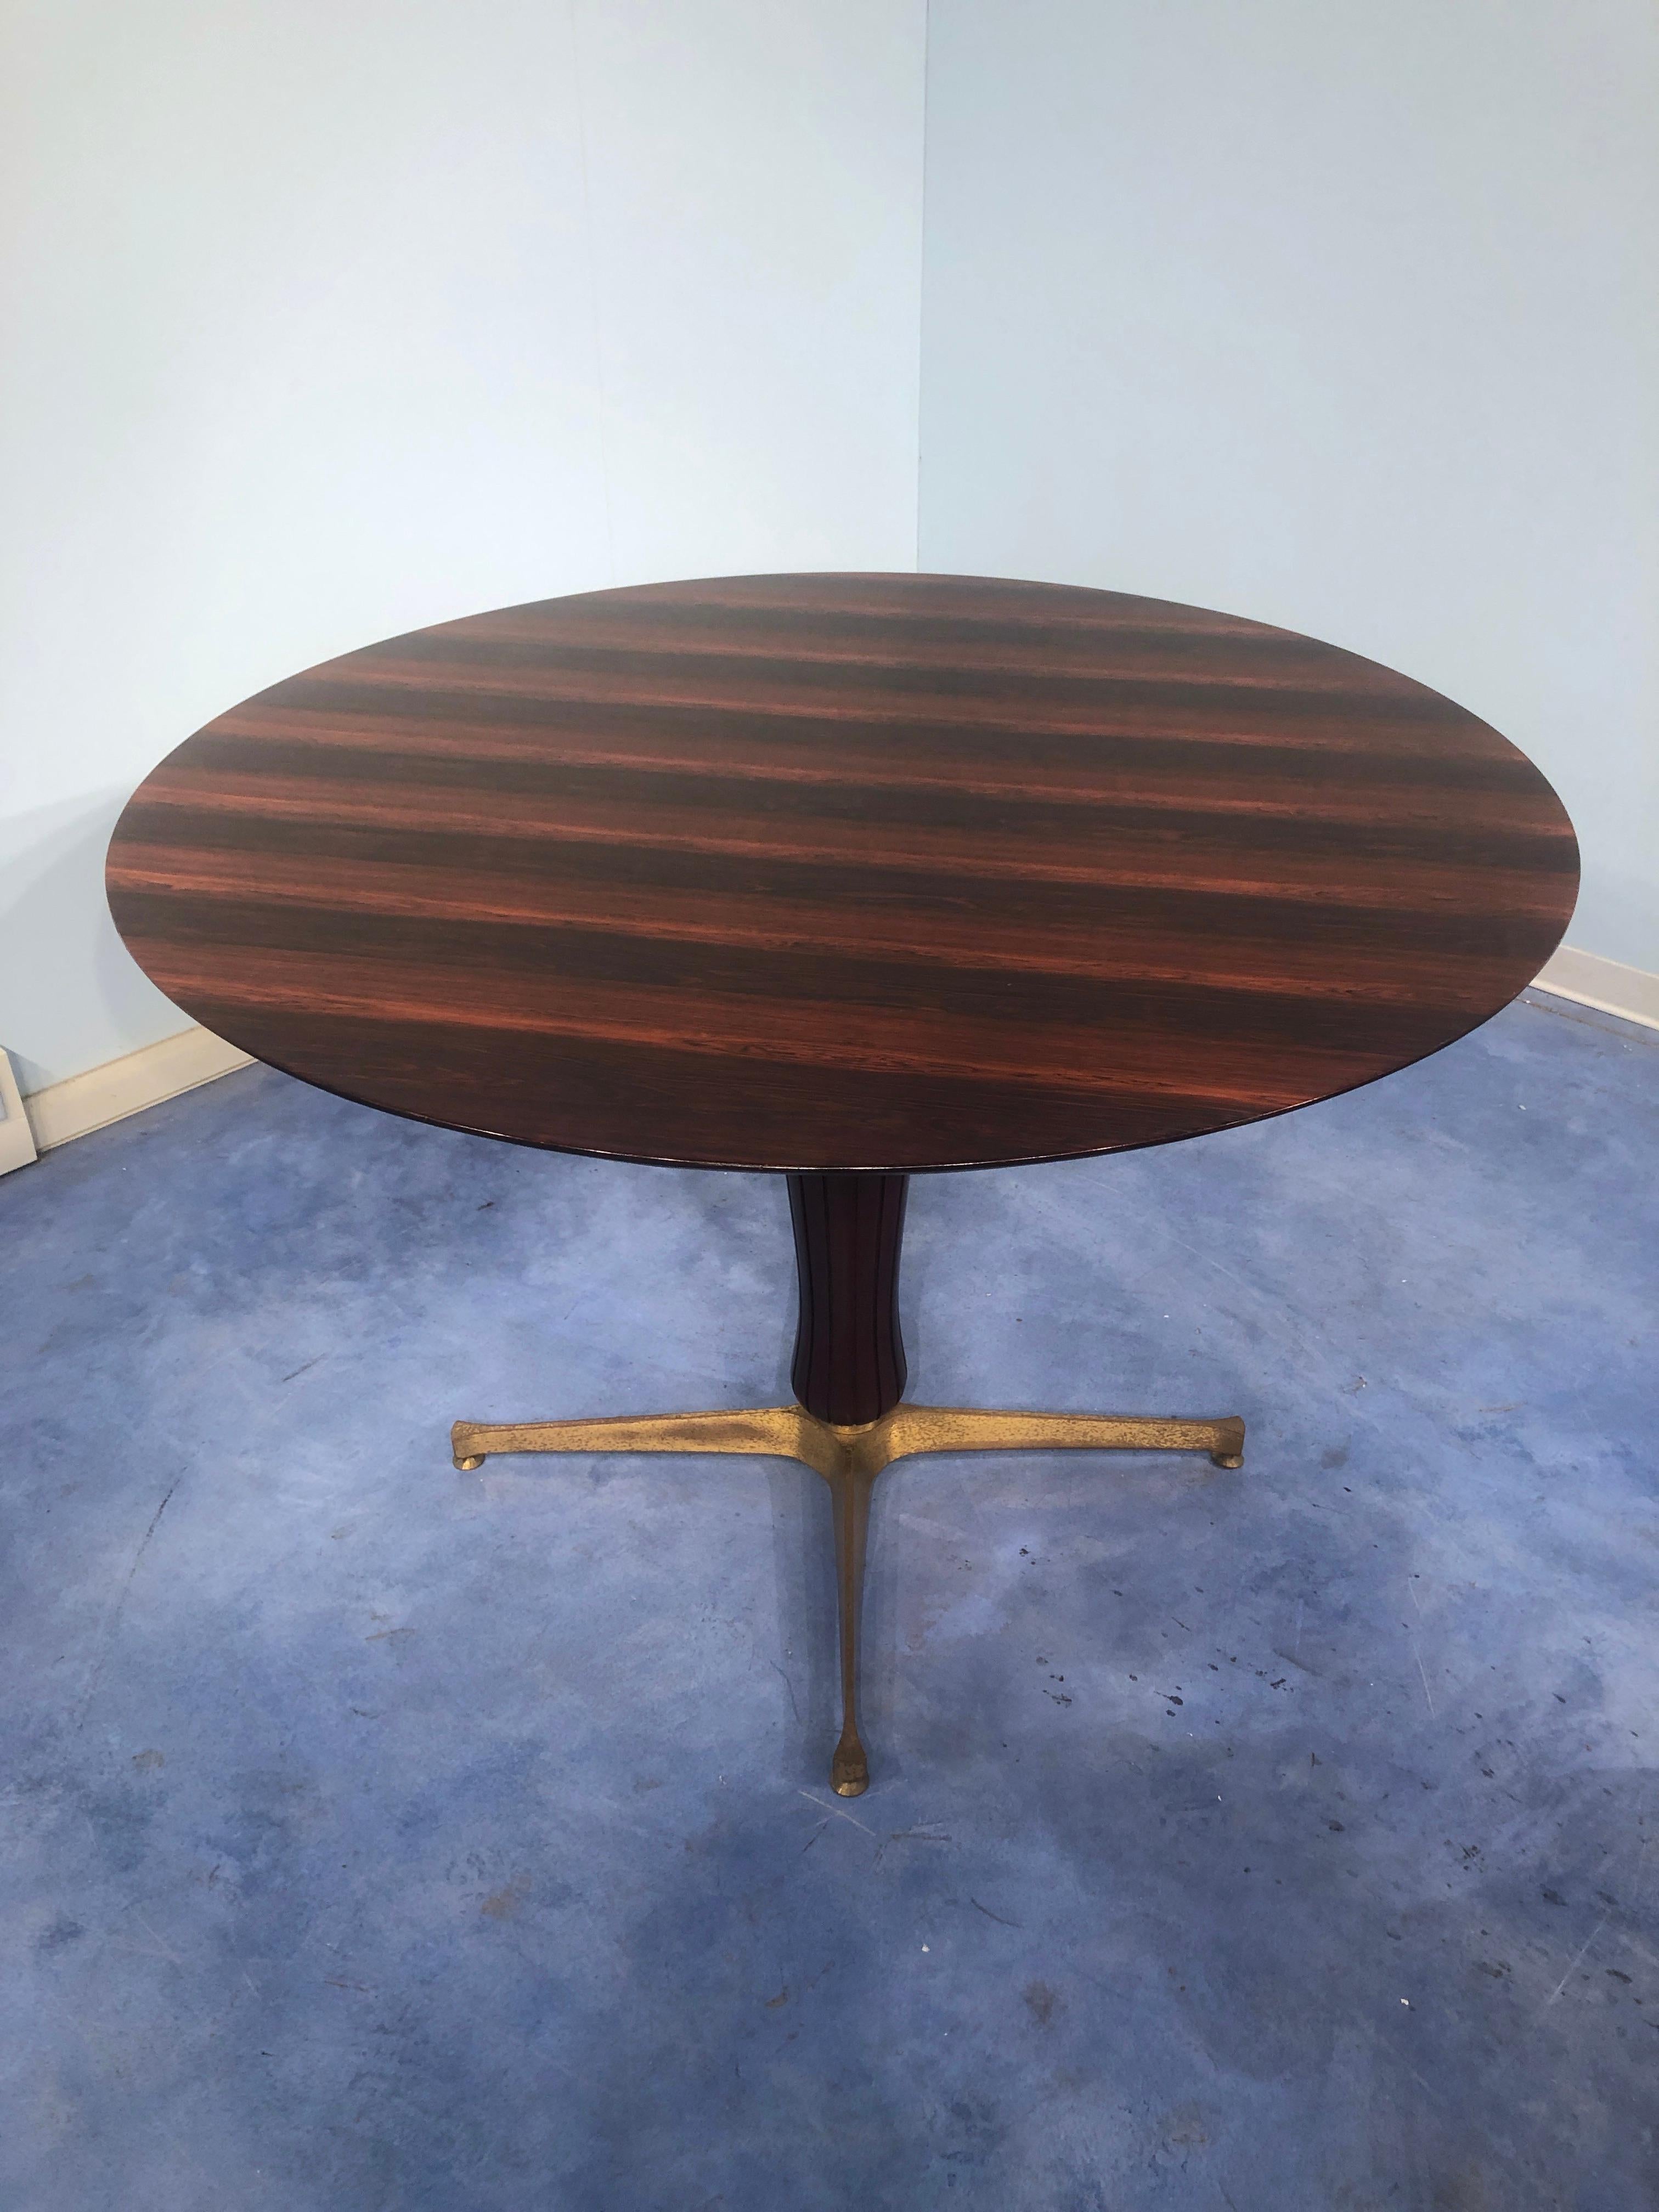 Italian Midcentury Teak Table Attributed to Paolo Buffa, 1950s For Sale 9